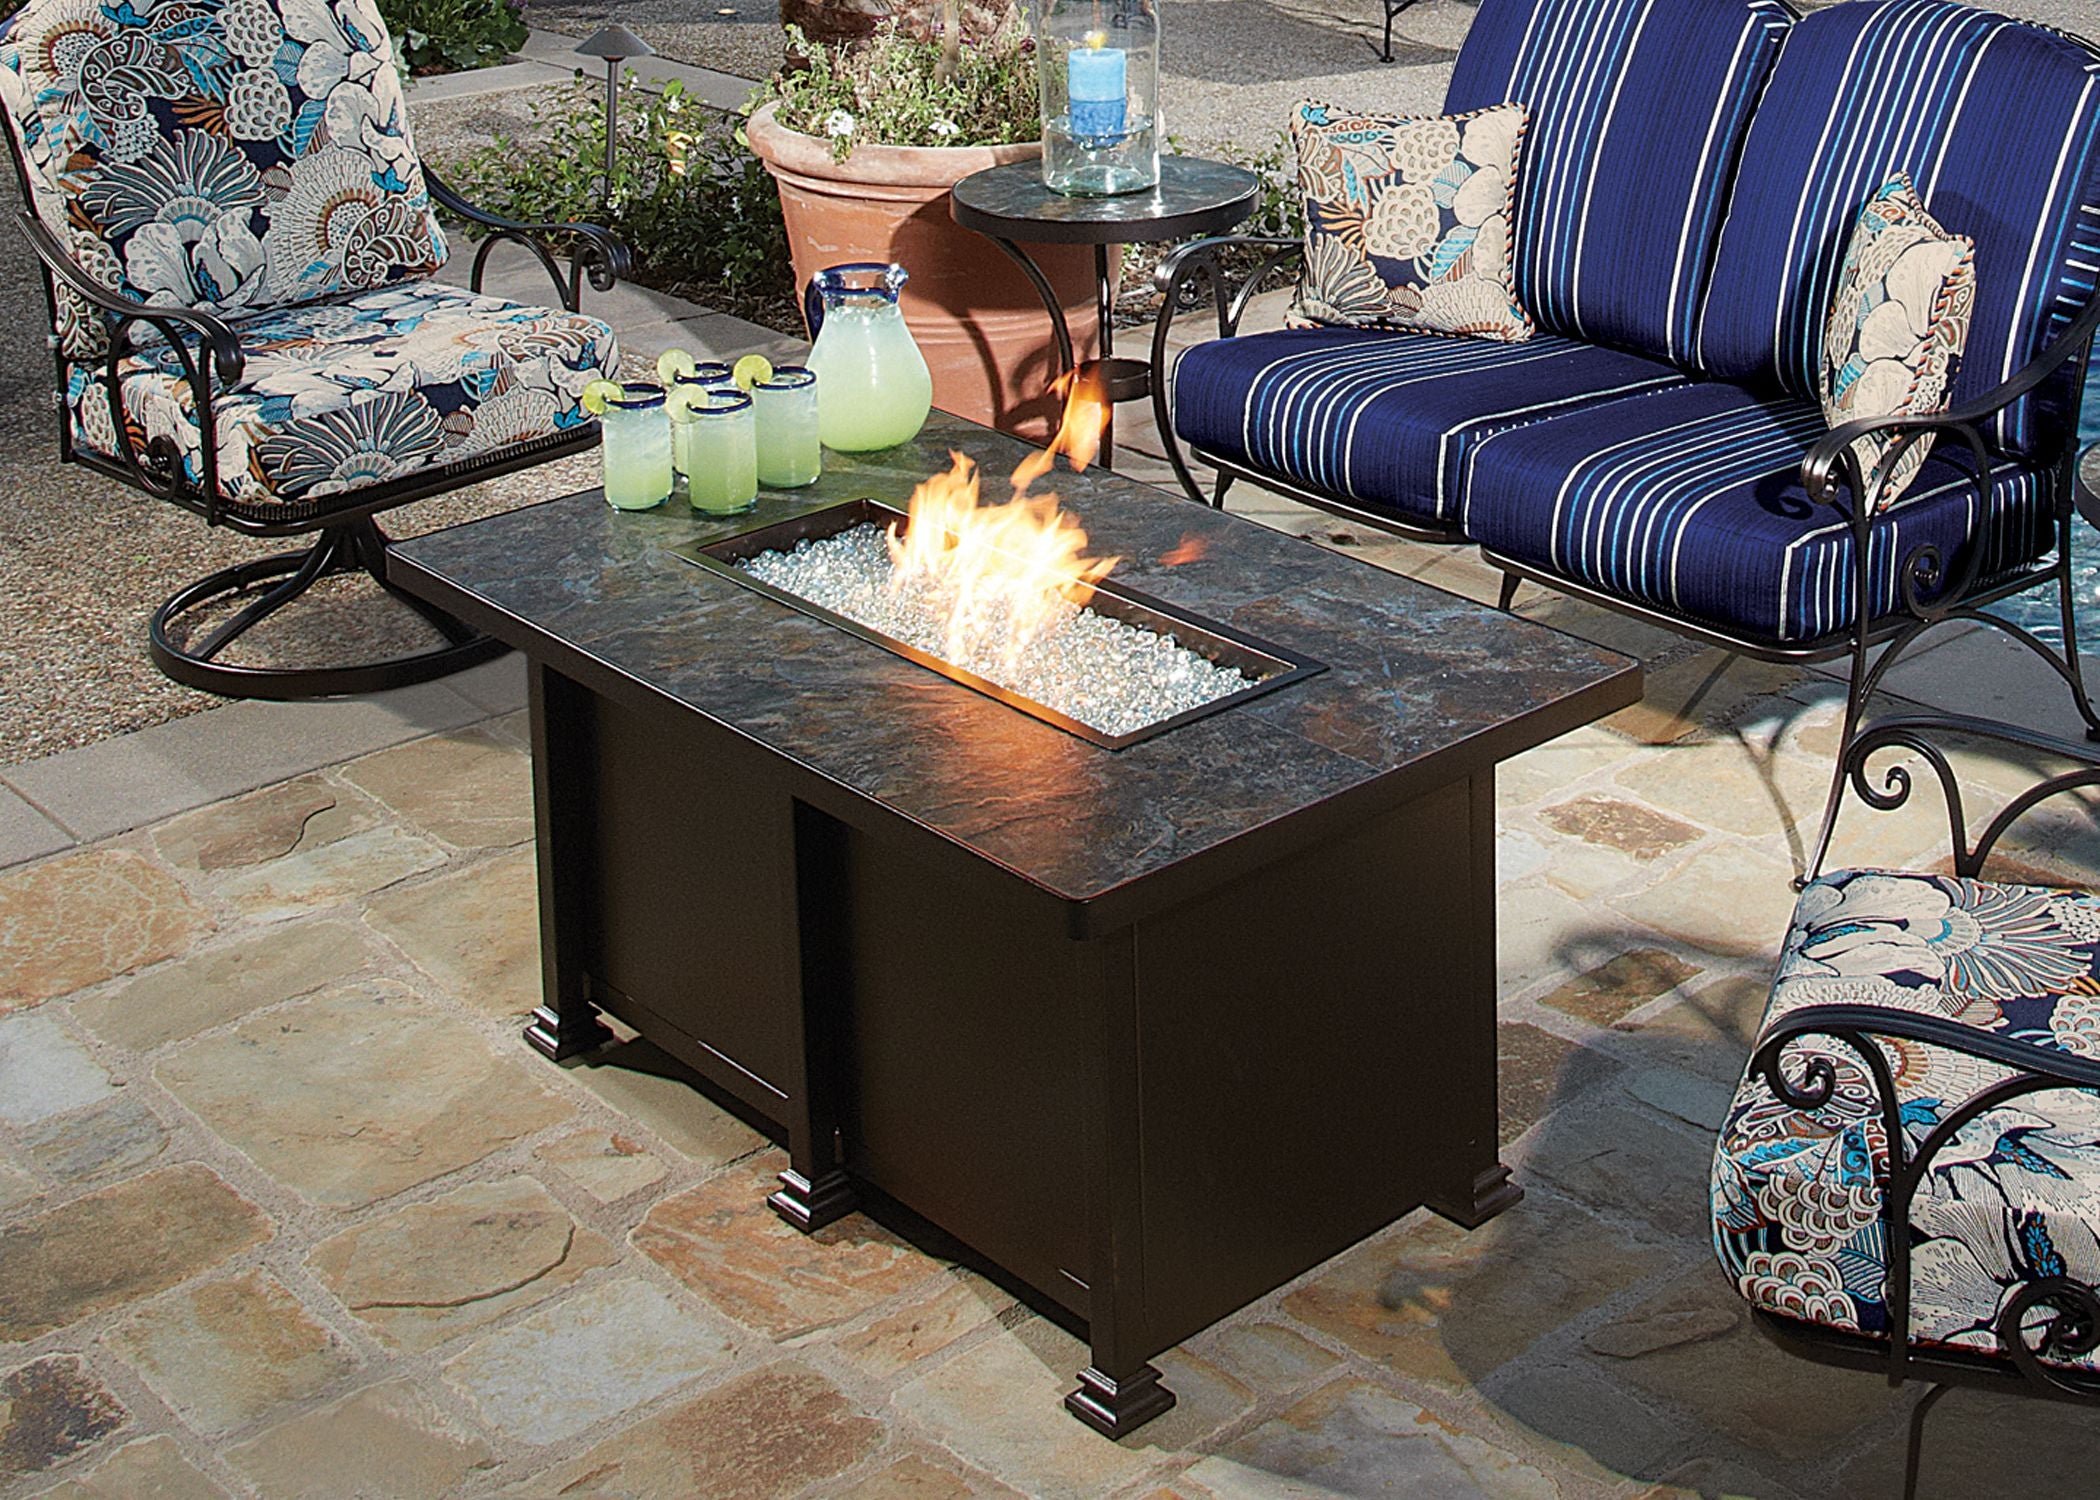 30"x50" Rectangle  Santorini Iron Fire Pit by Ow Lee